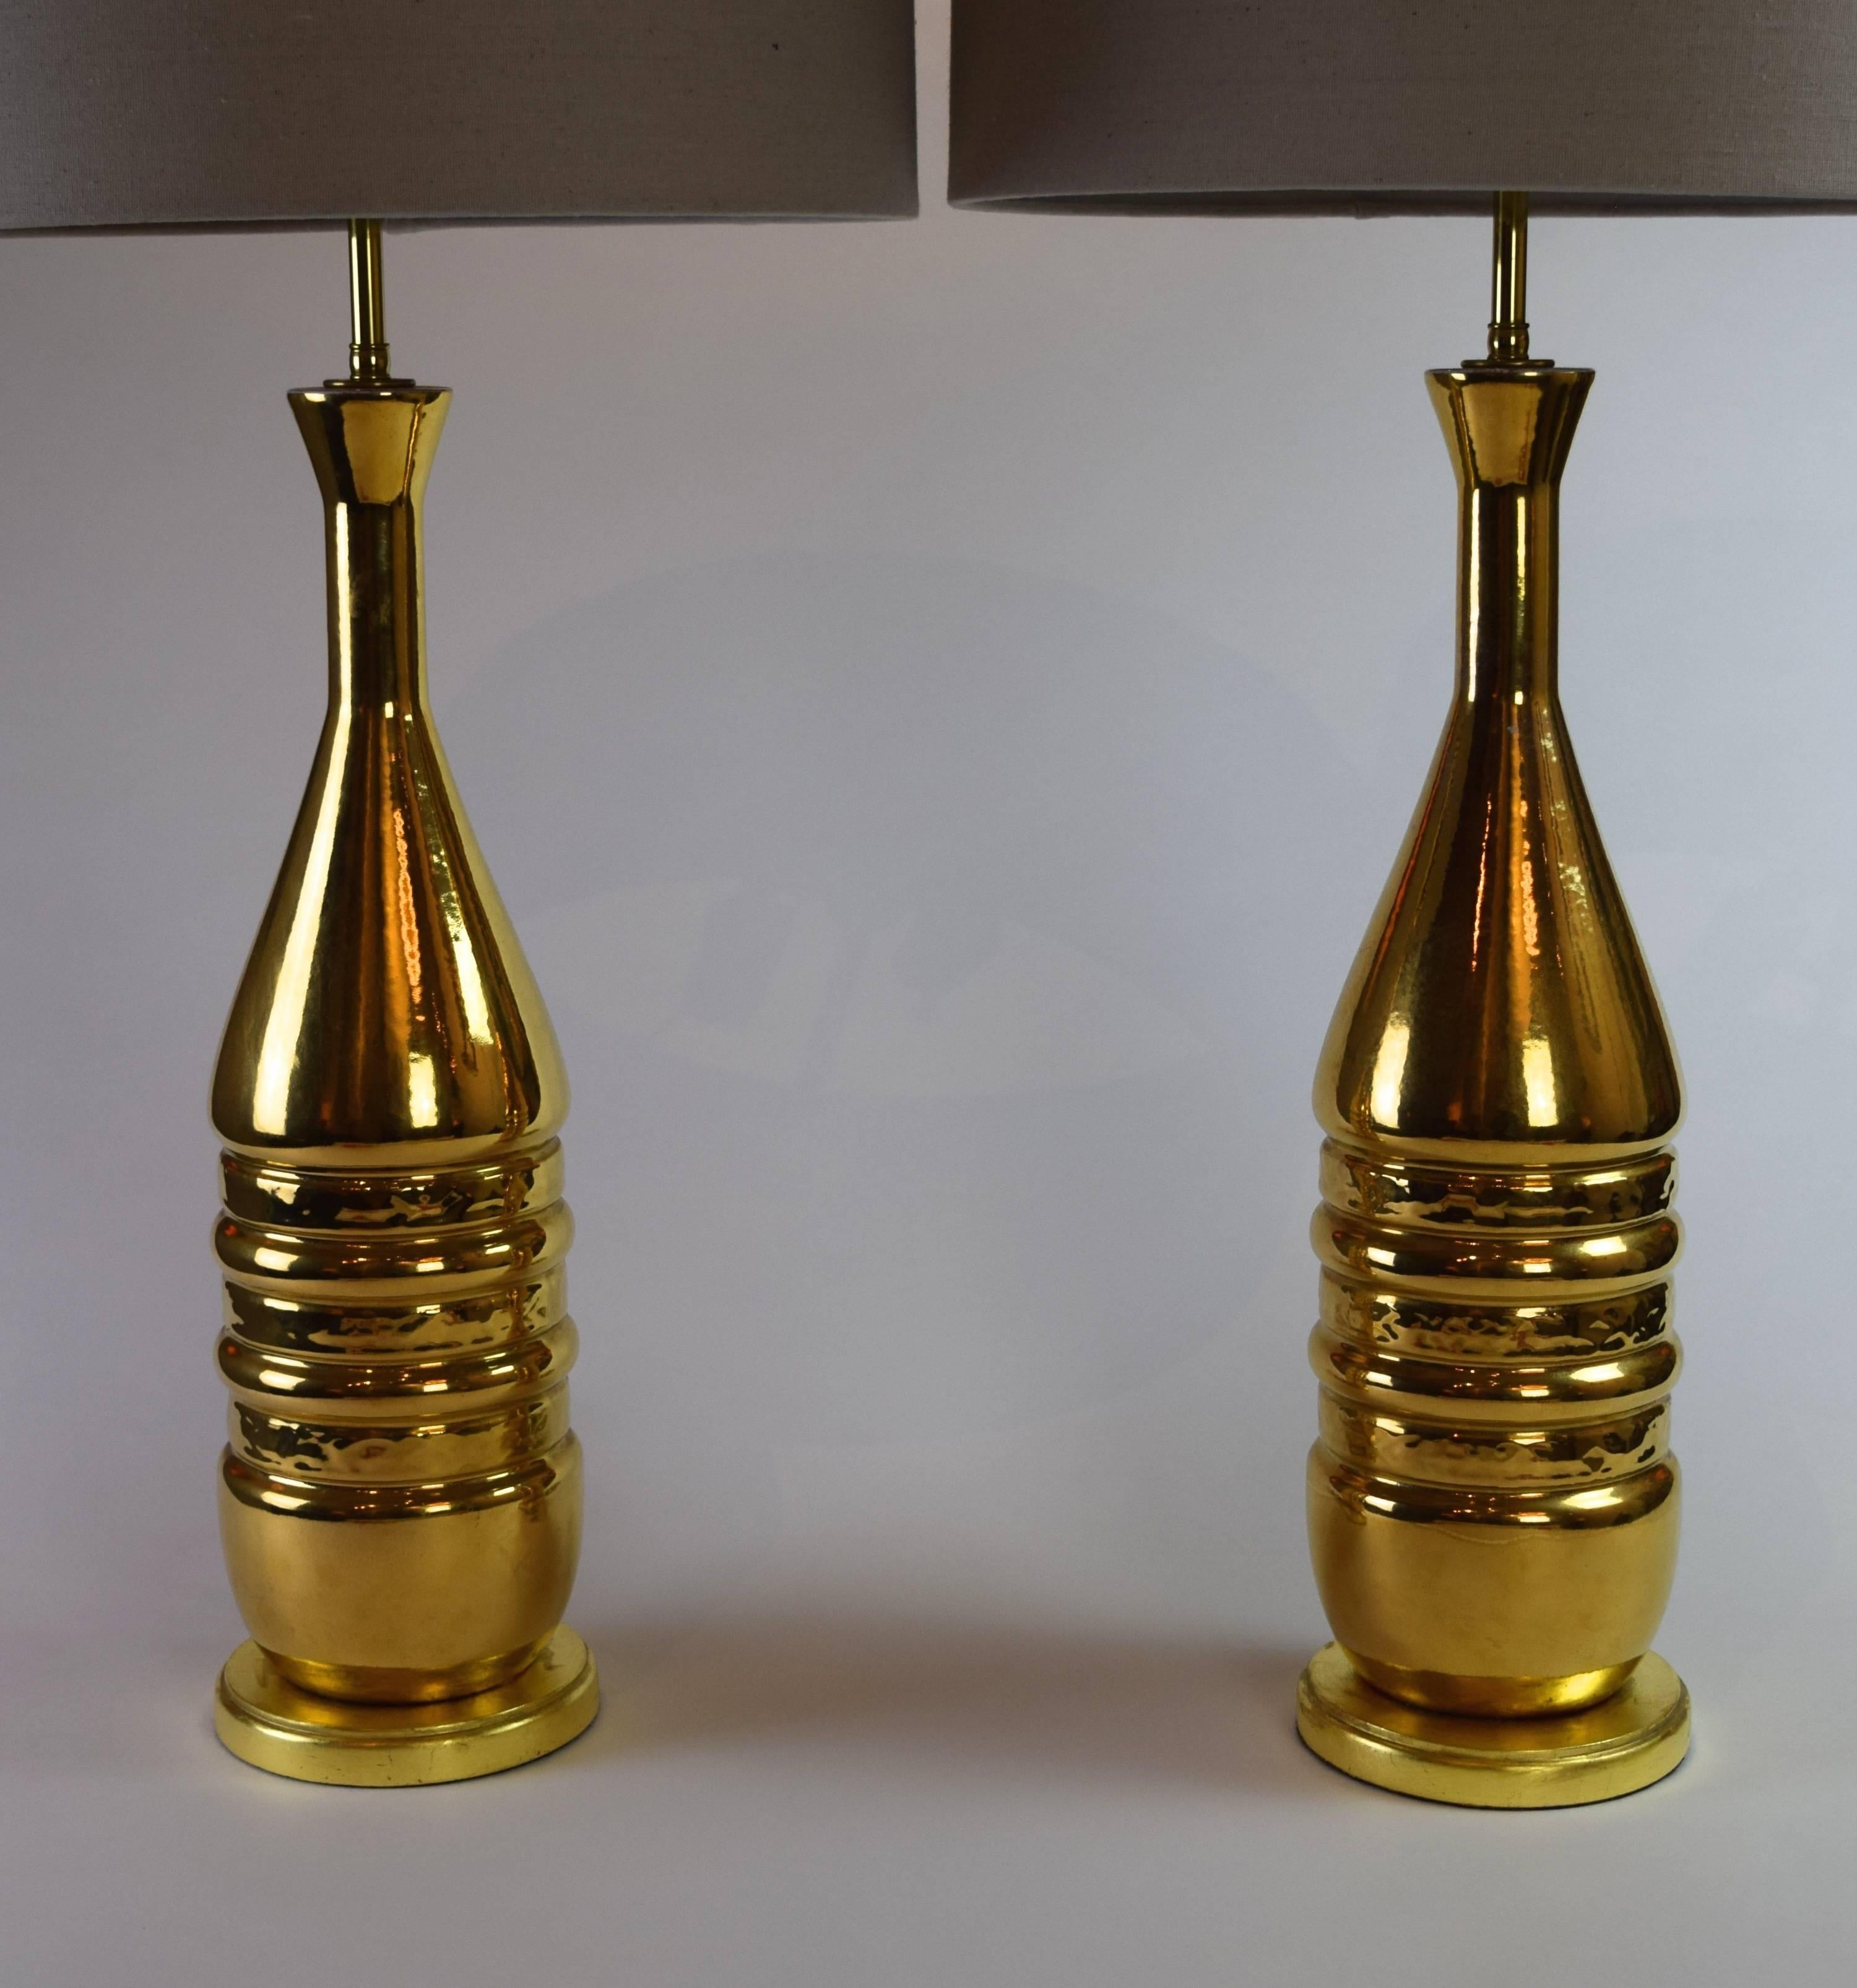 20th Century Pair of Tall Mid-Century Modern Gilt Ceramic Lamps For Sale